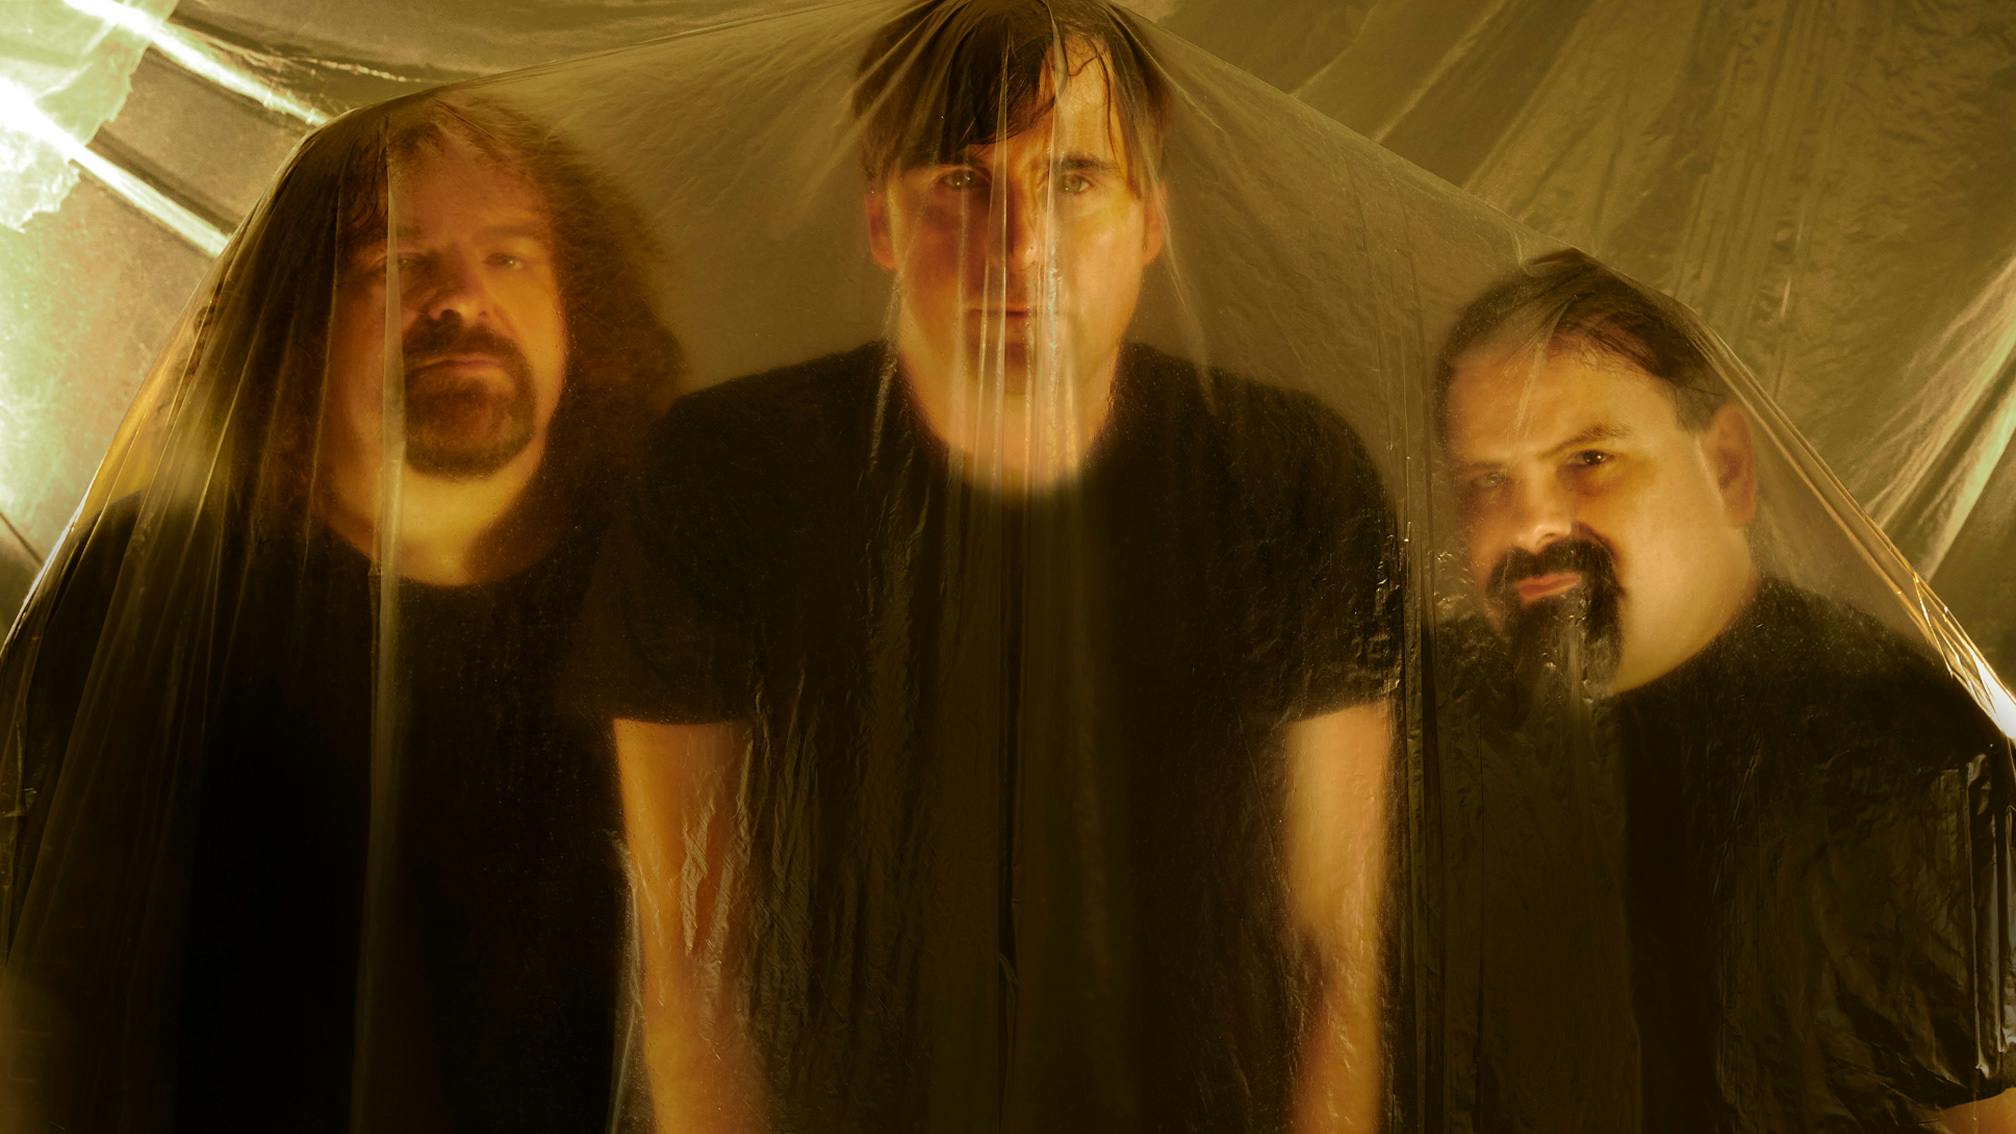 They’ll always fight fascists, but Napalm Death is about more than politics